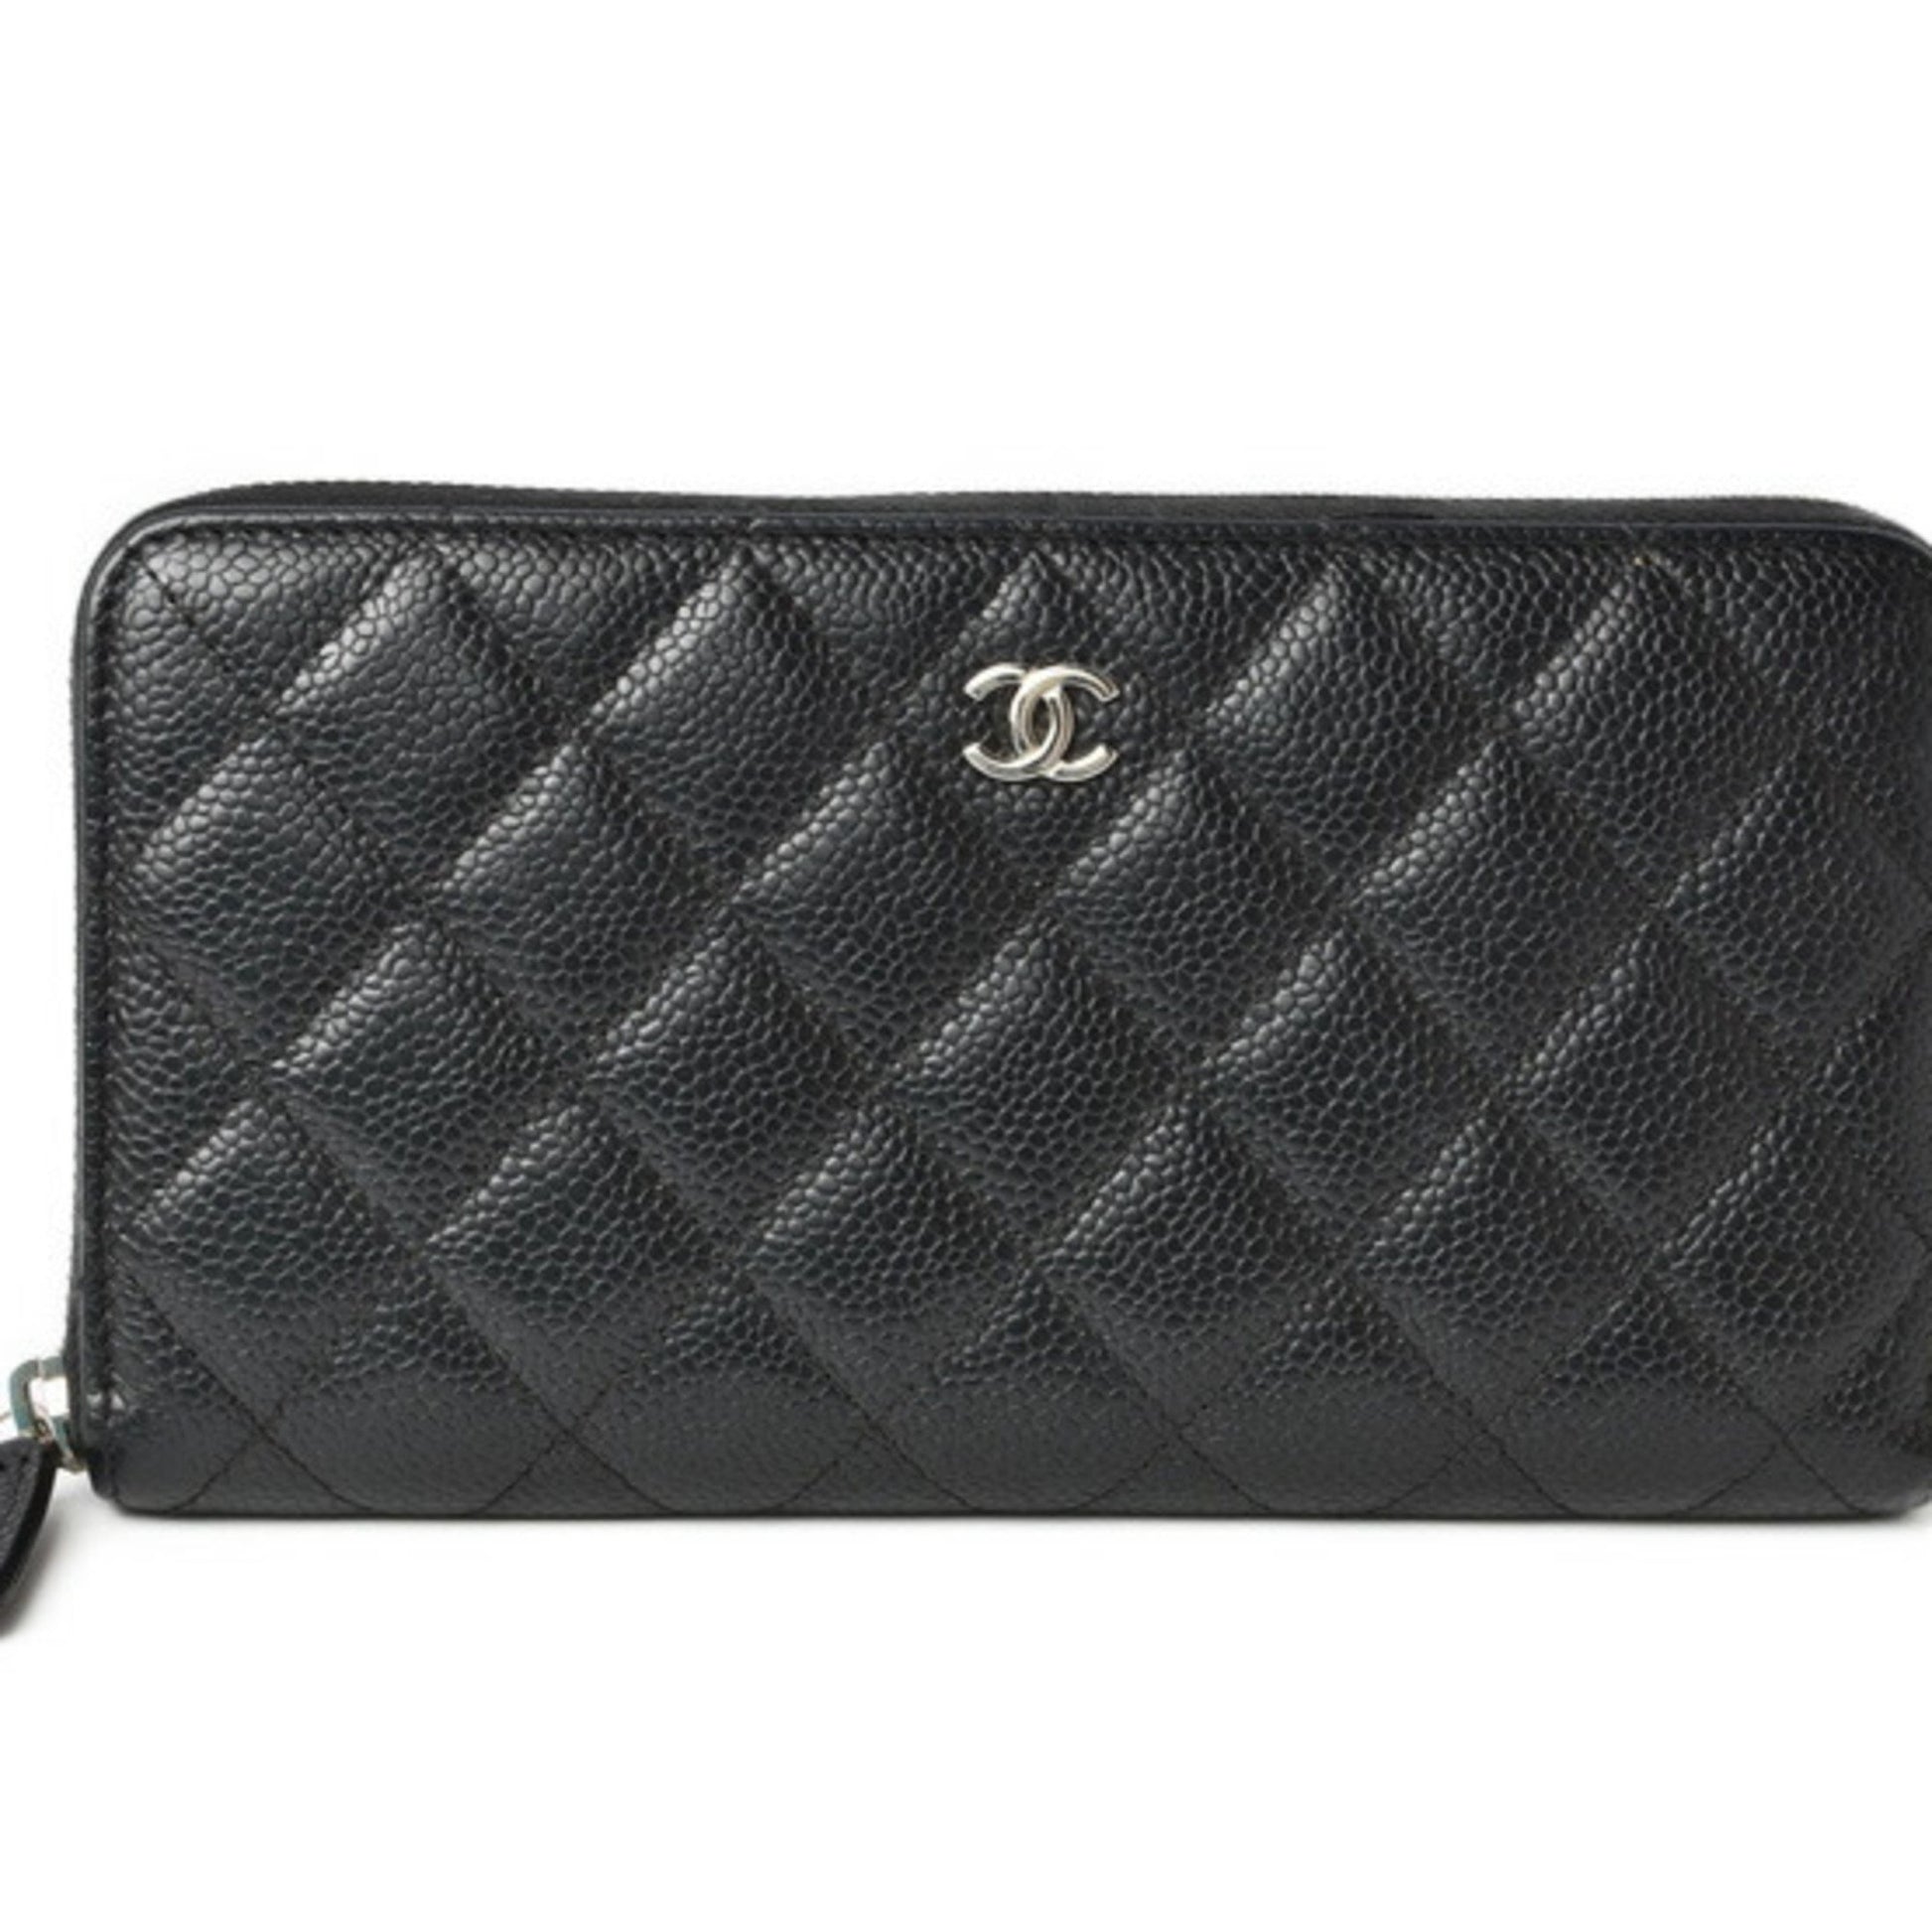 CHANEL wallet long quilting matelasse caviar skin black silver A50097